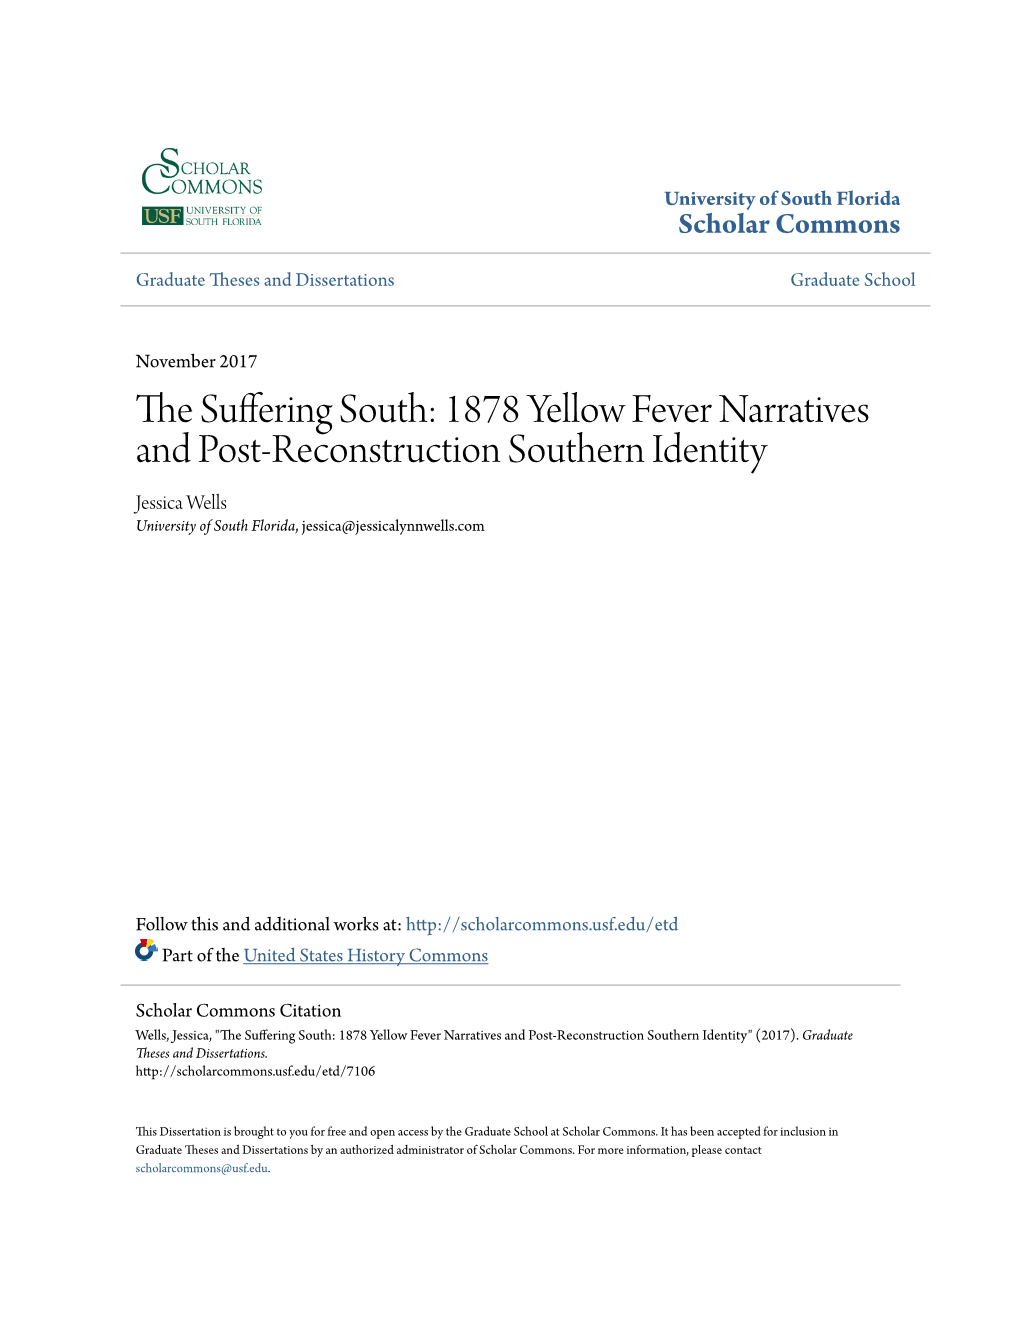 1878 Yellow Fever Narratives and Post-Reconstruction Southern Identity Jessica Wells University of South Florida, Jessica@Jessicalynnwells.Com